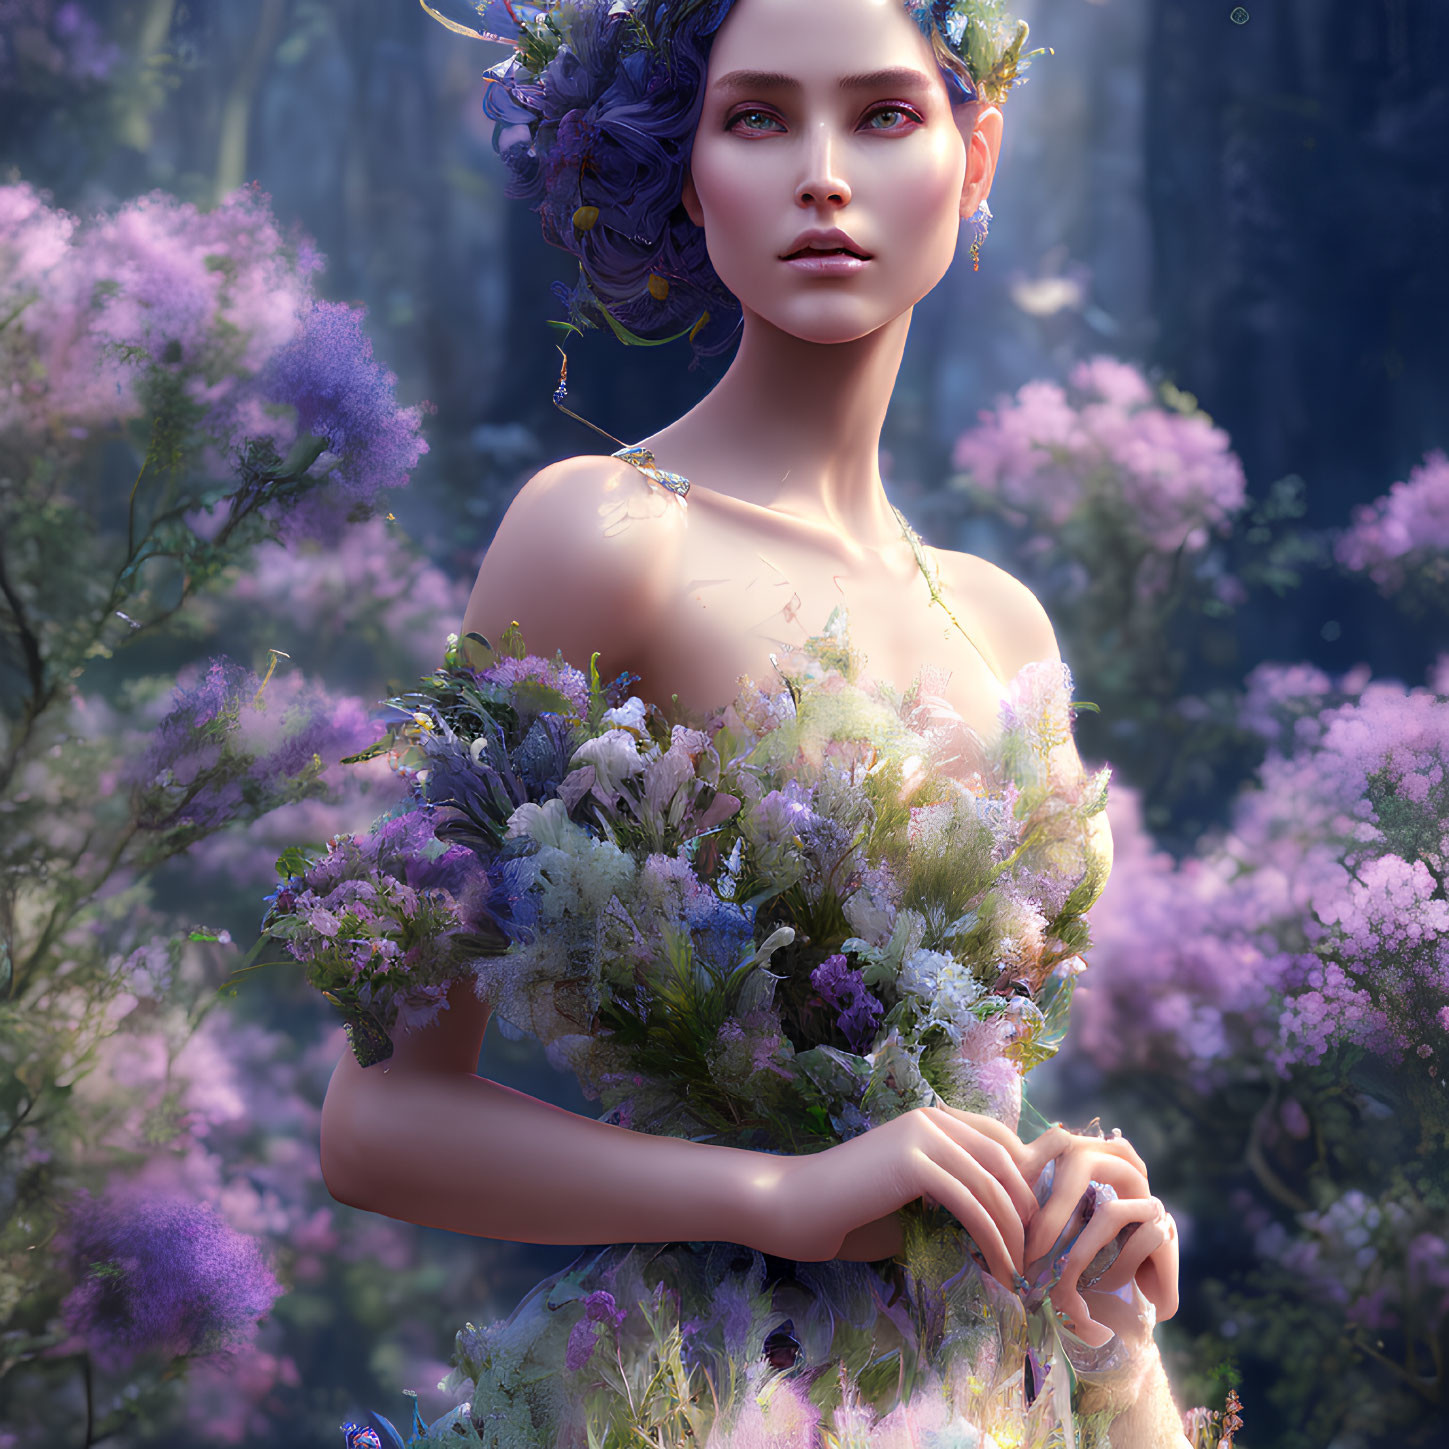 Digital artwork: Woman with floral elements in mystical purple hues, set in blooming forest